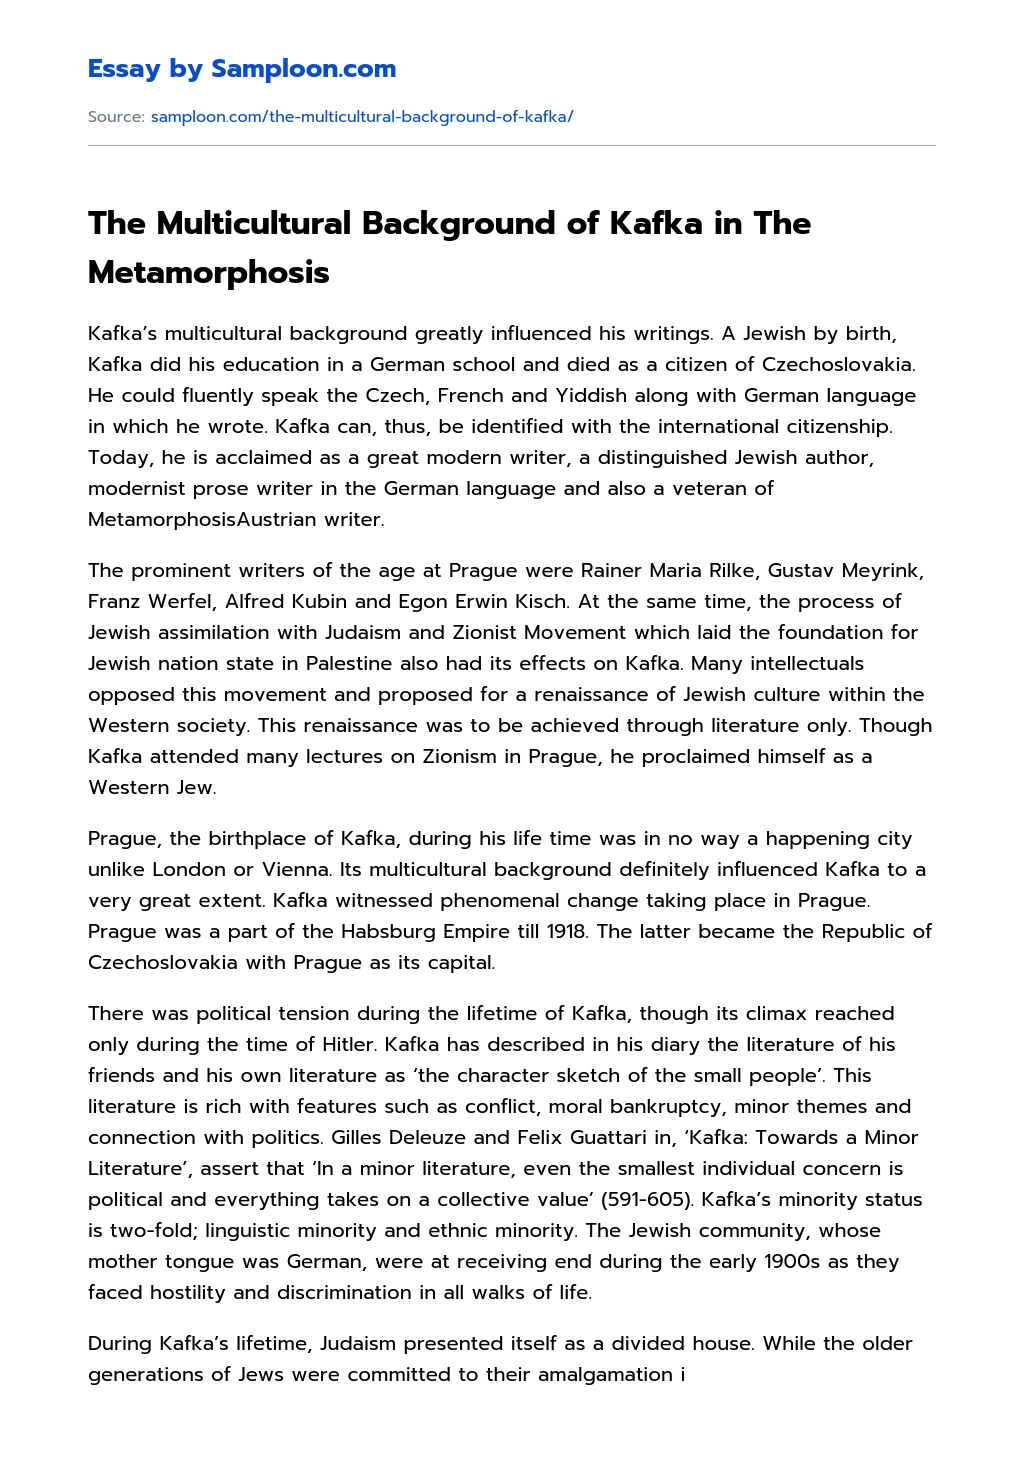 The Multicultural Background of Kafka in The Metamorphosis Summary essay